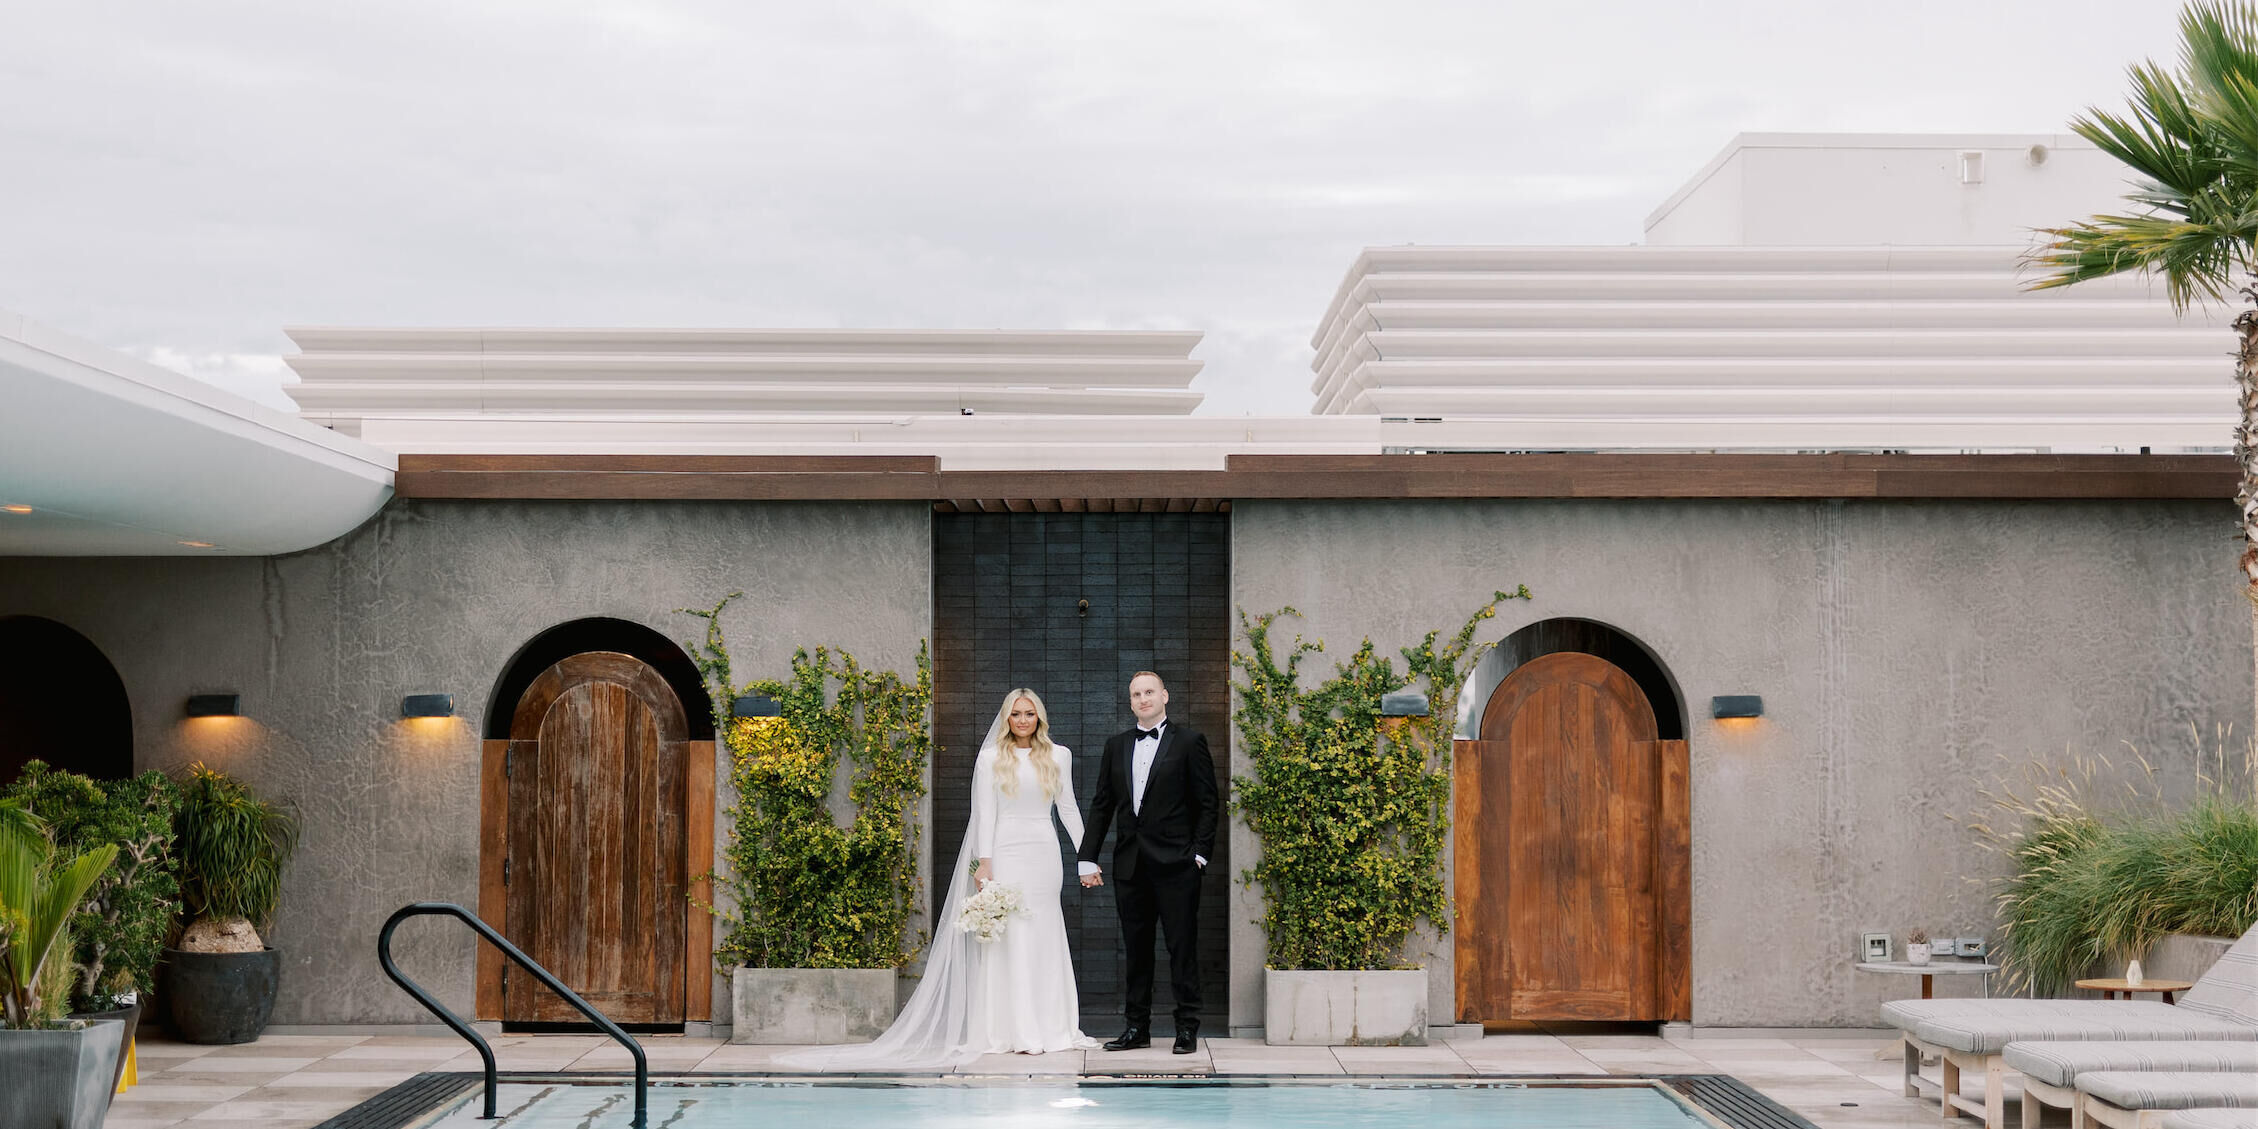 A bride and groom take a portrait by the pool of the Santa Monica Proper during their modern California wedding.